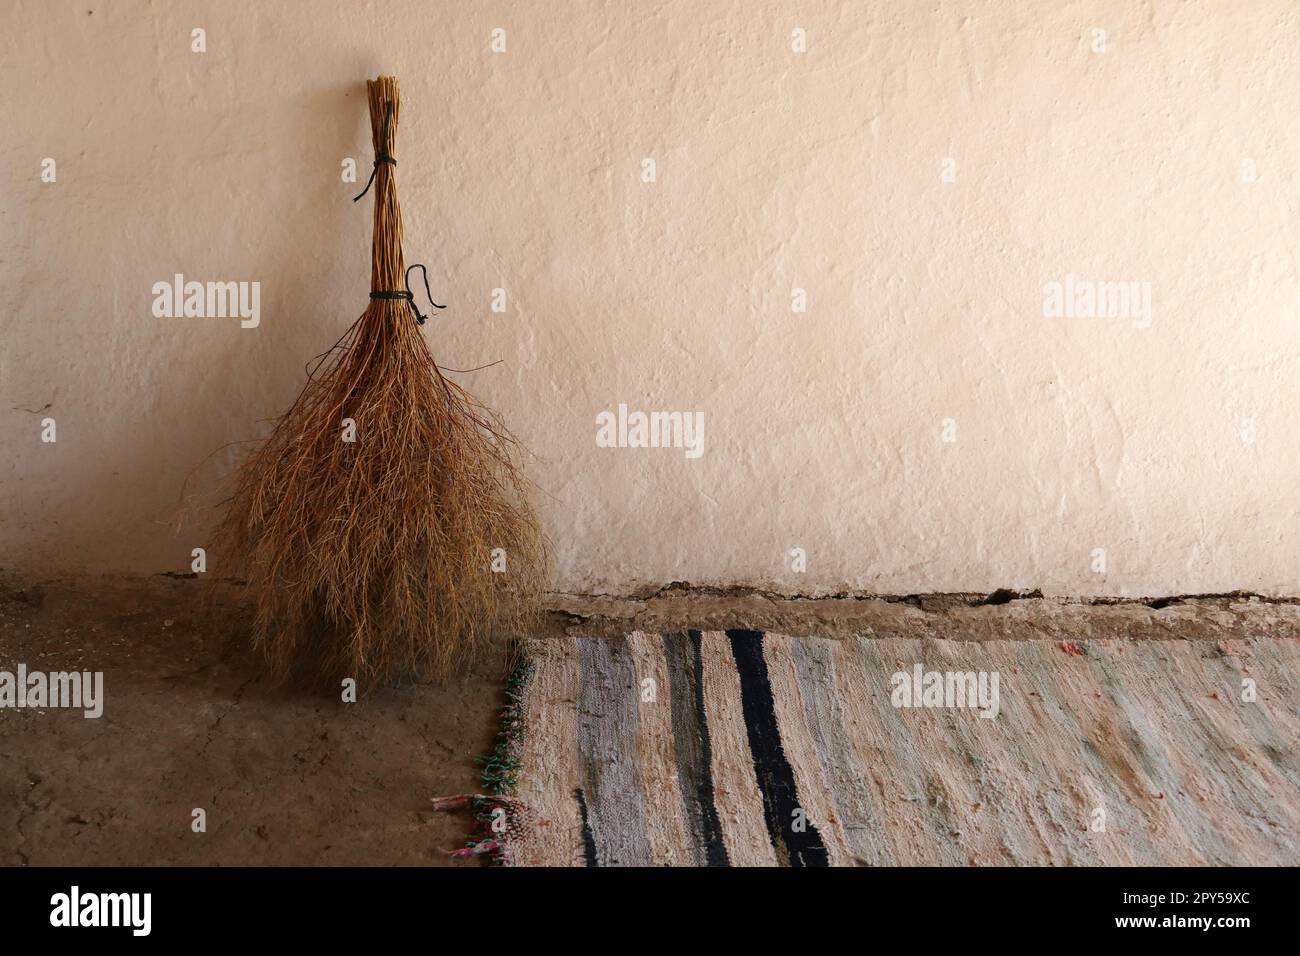 hand woven classic carpet and handmade grass broom, classic village household items Stock Photo